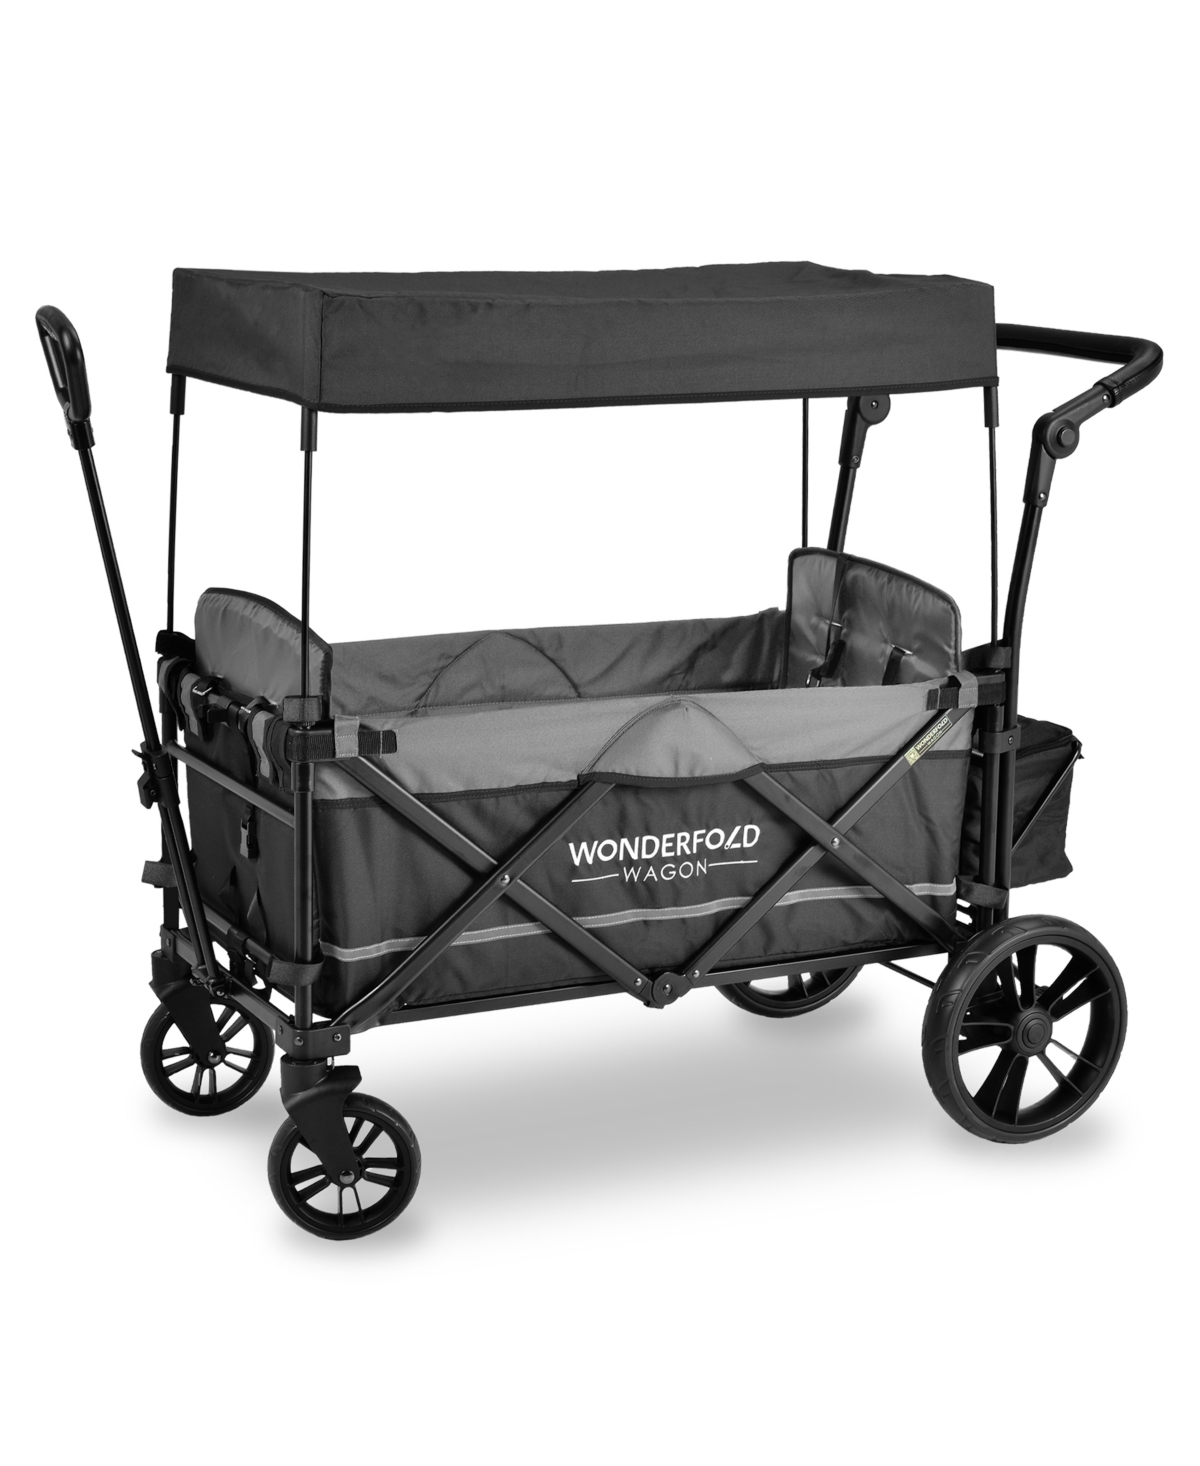 Wonderfold Wagon X2 Push And Pull Double Stroller Wagon In Stone Gray